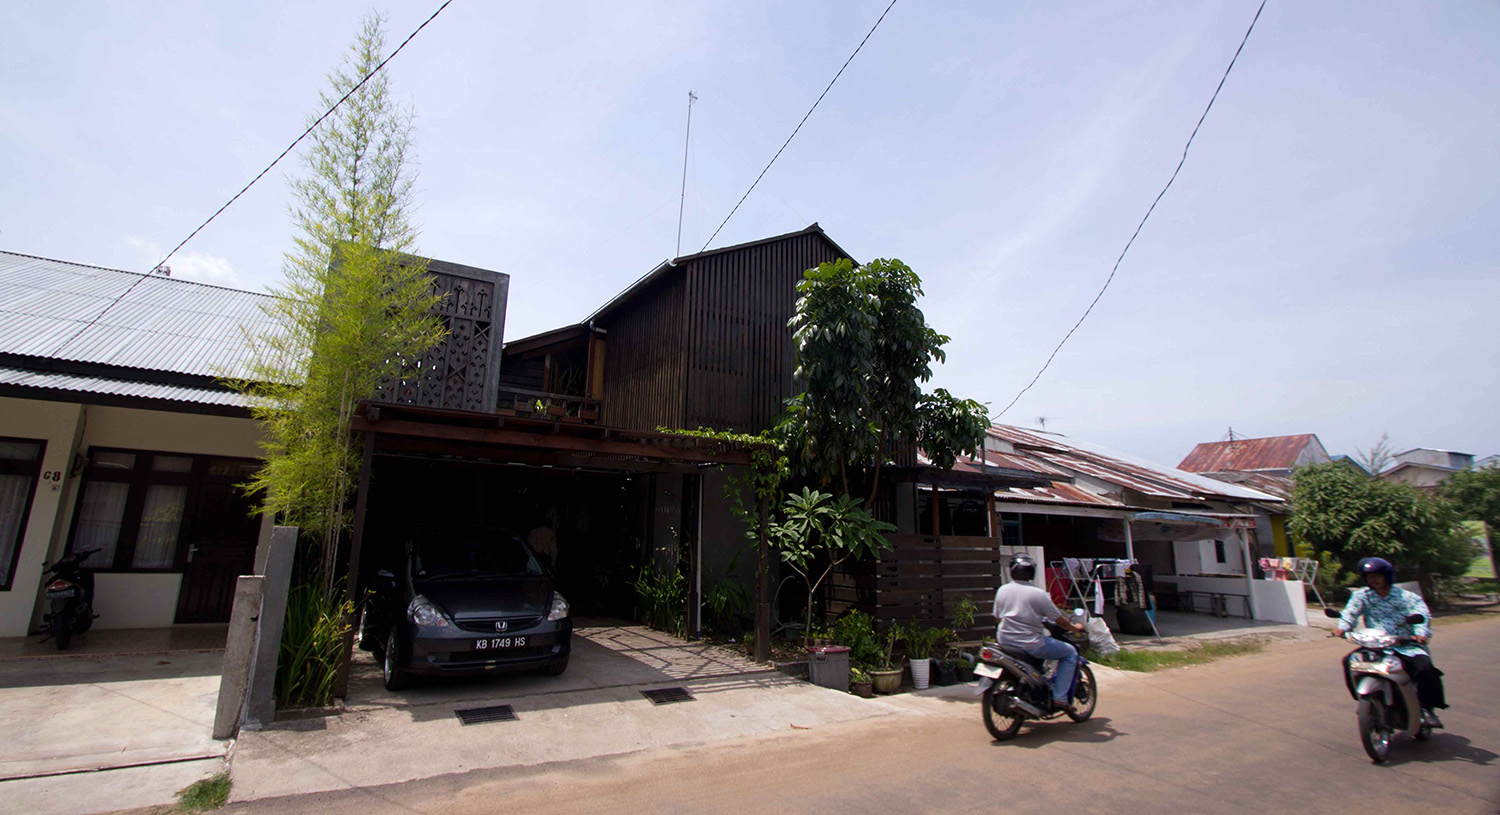 The residential neighborhood has abandoned timber architecture while Panjang House used second-handed ironwood for its structure and facade